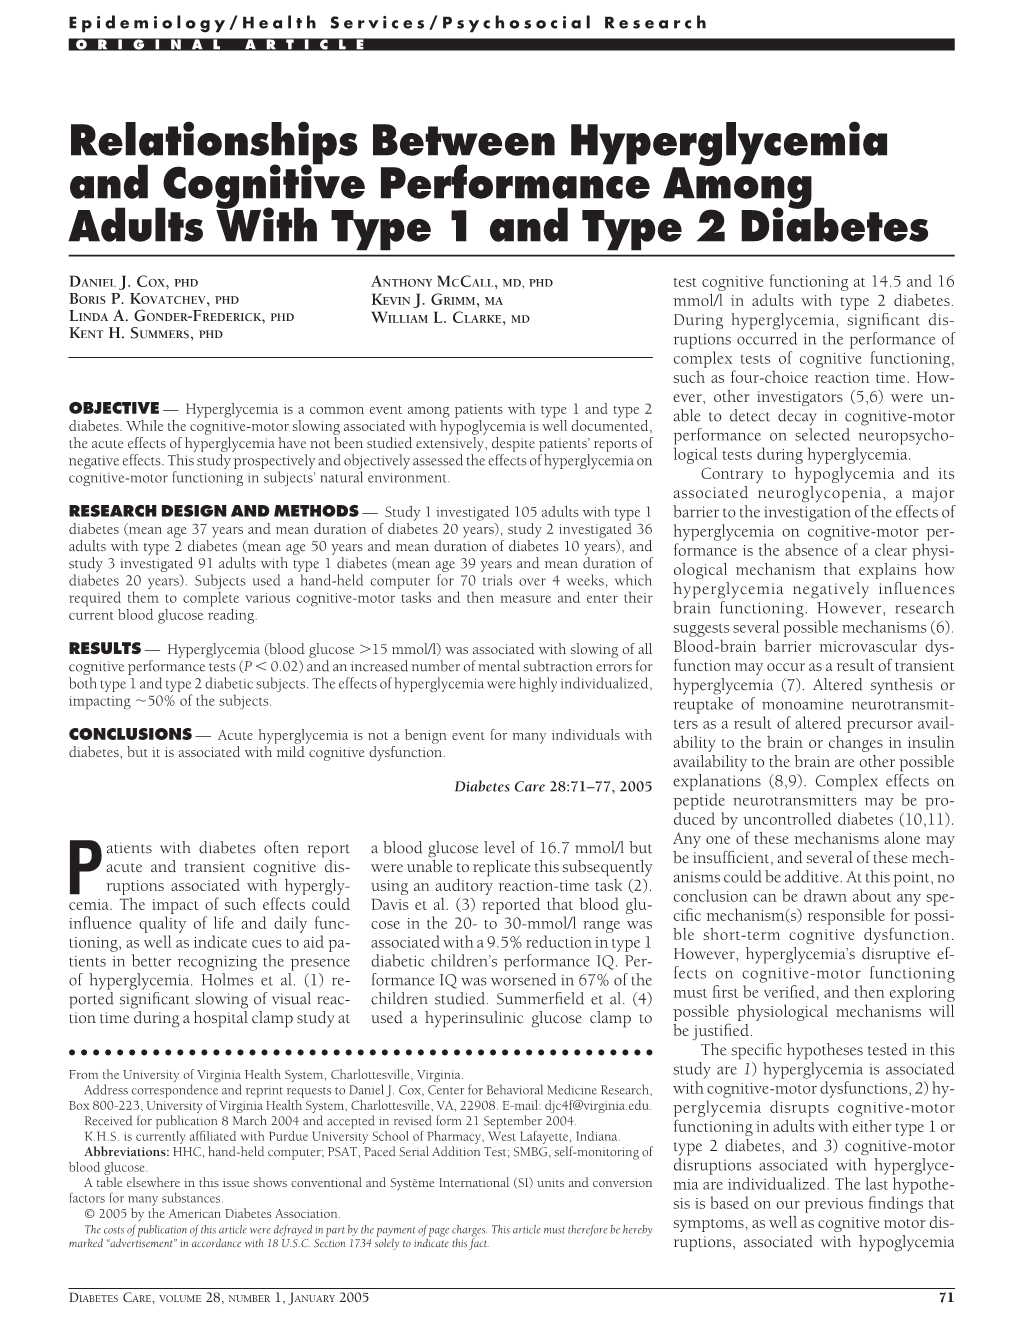 Relationships Between Hyperglycemia and Cognitive Performance Among Adults with Type 1 and Type 2 Diabetes